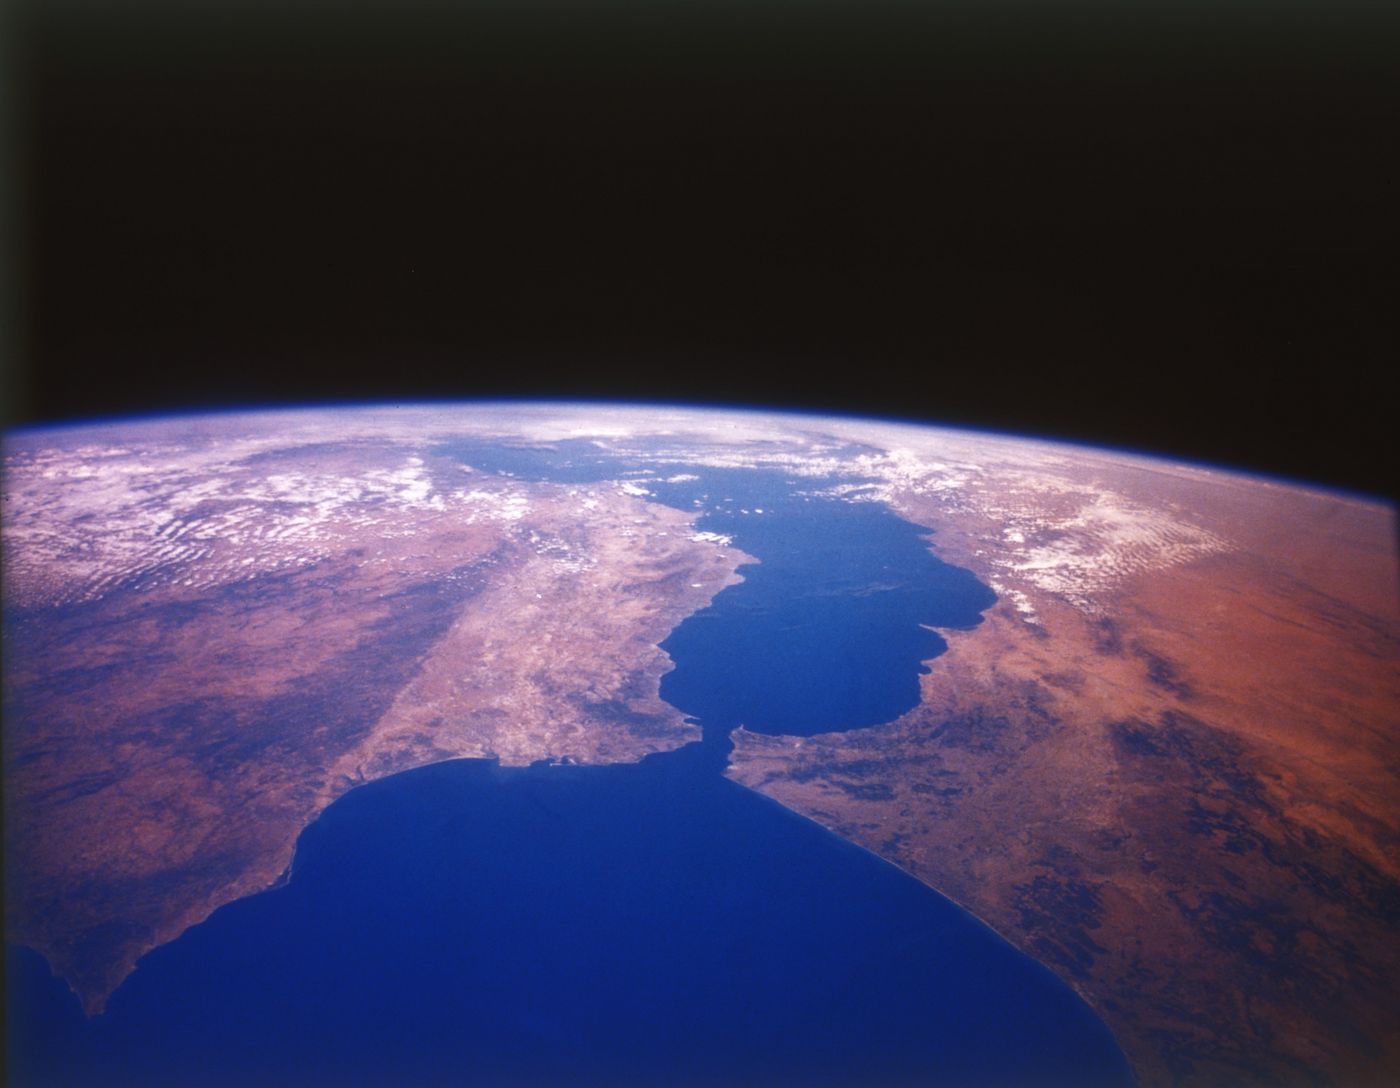 View from space, c1980s: The Straits of Gibraltar, where Europe's southern tip at Gibraltar nearly connects with Morocco's coast, delineating the Atlantic Ocean from the Mediterranean Sea.